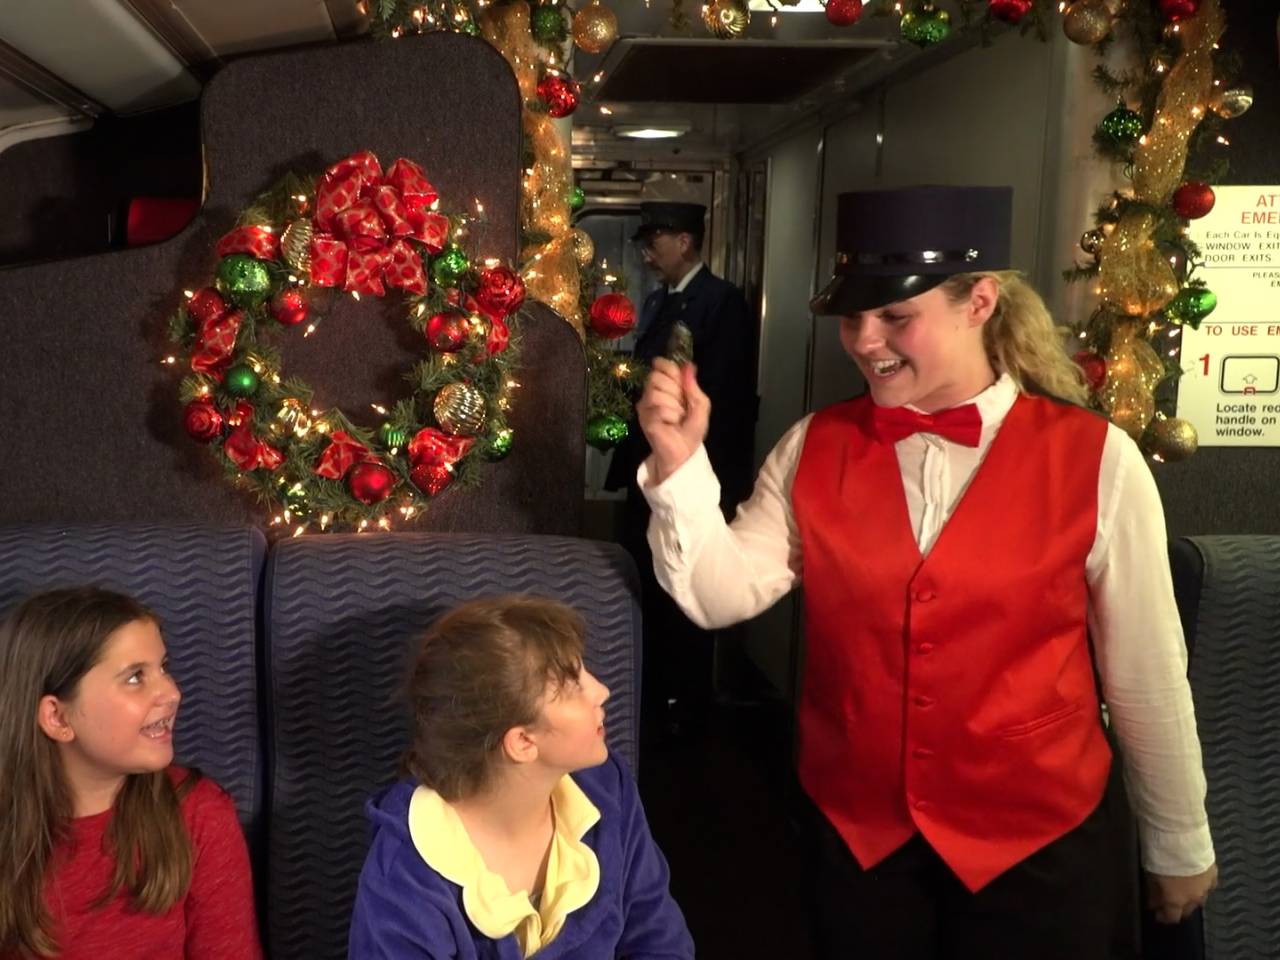 two children smile up at a train conductor while sitting under a wreath decorated with red and green ornaments on a train